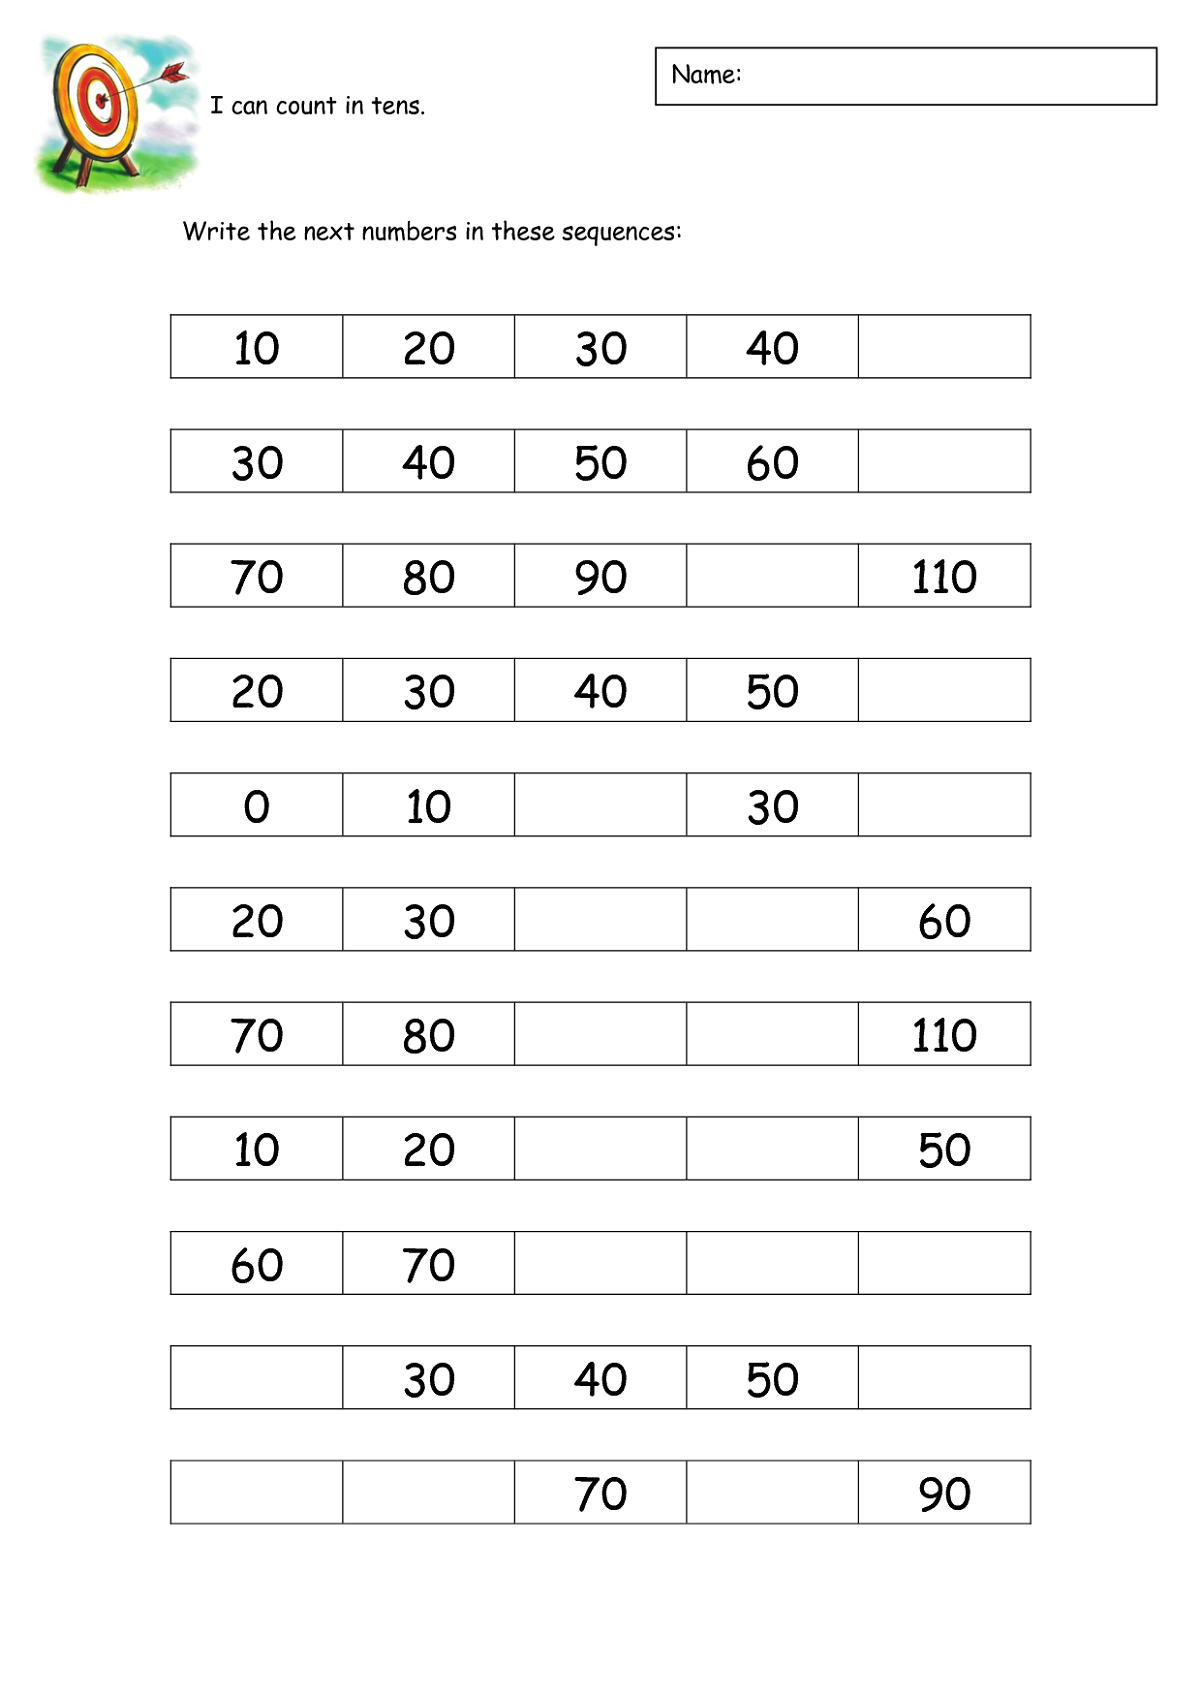 skip-count-by-10-worksheets-activity-shelter-printable-skip-count-by